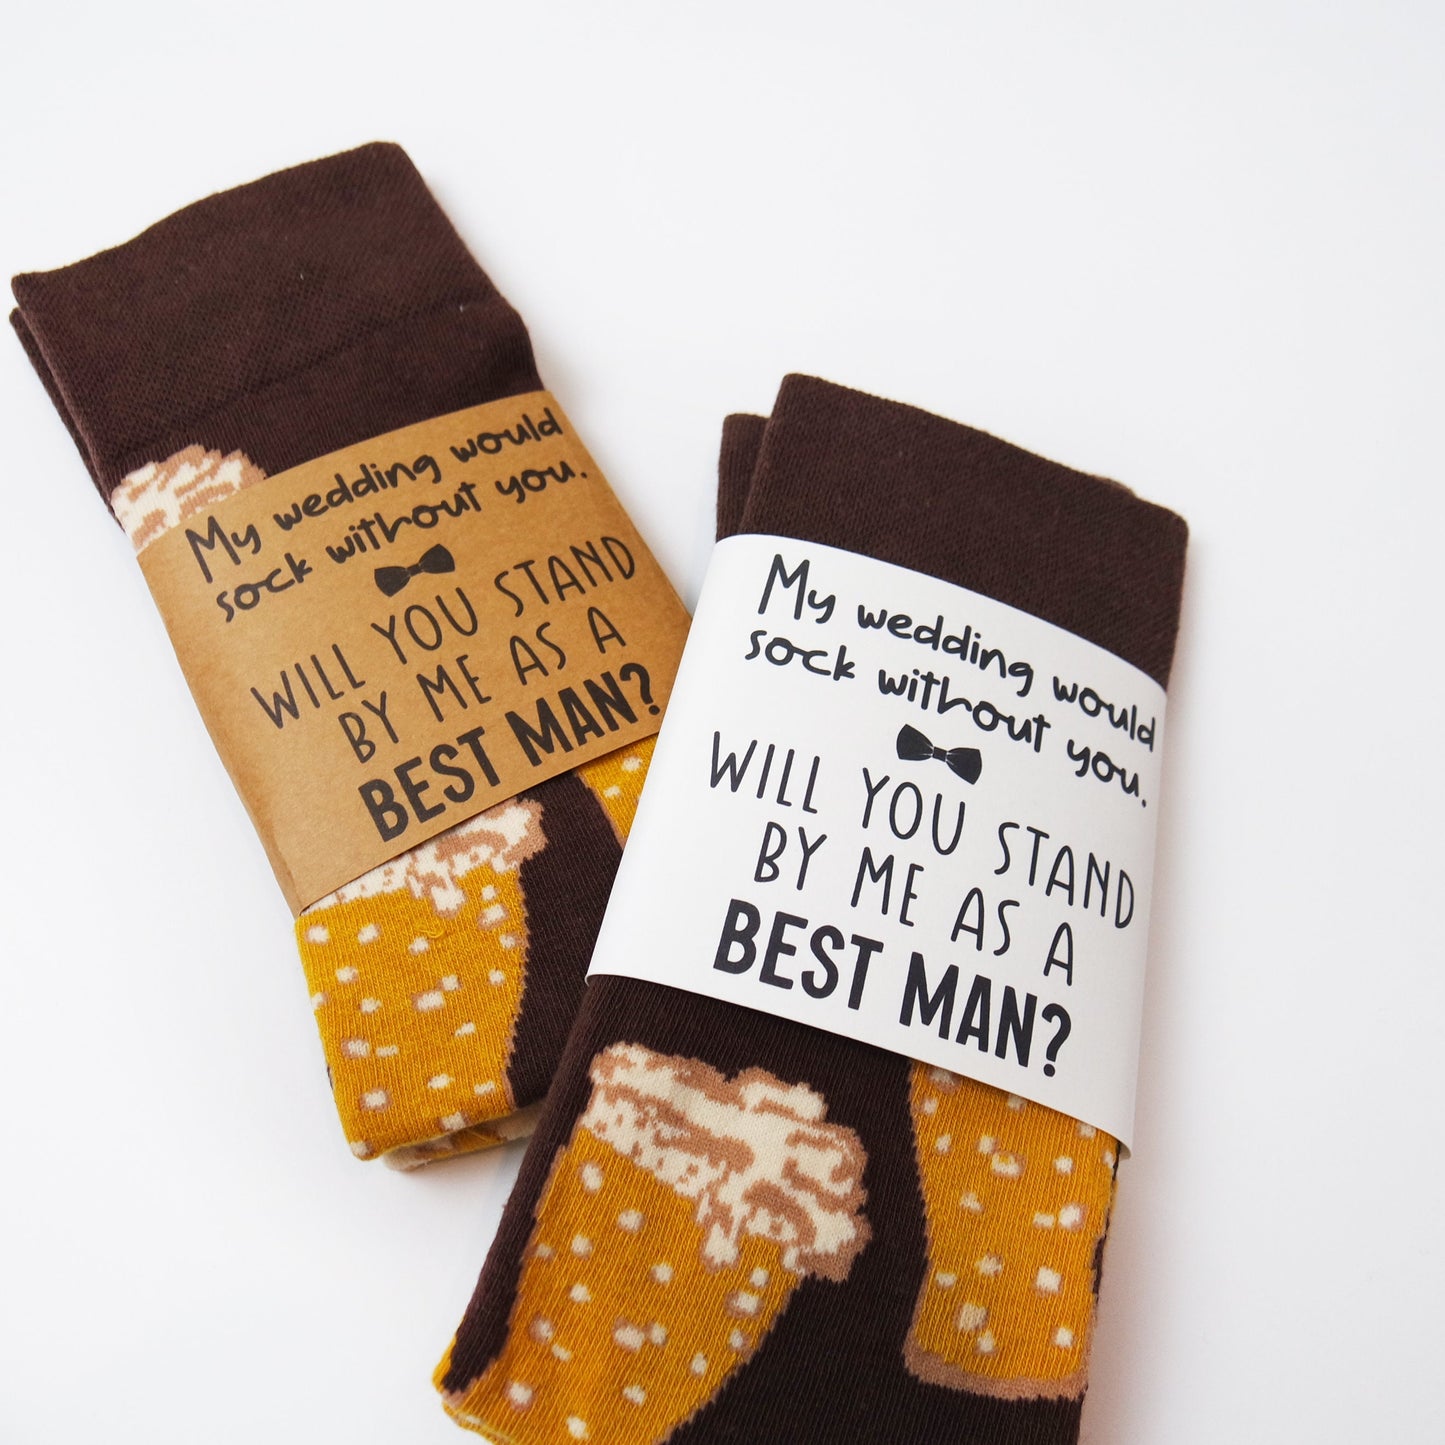 Best Man Socks, My Wedding Would Sock Without You, Will You Be My Best Man, Best Man Proposal, Groomsmen, Funny Best Man Wedding Gift Ideas